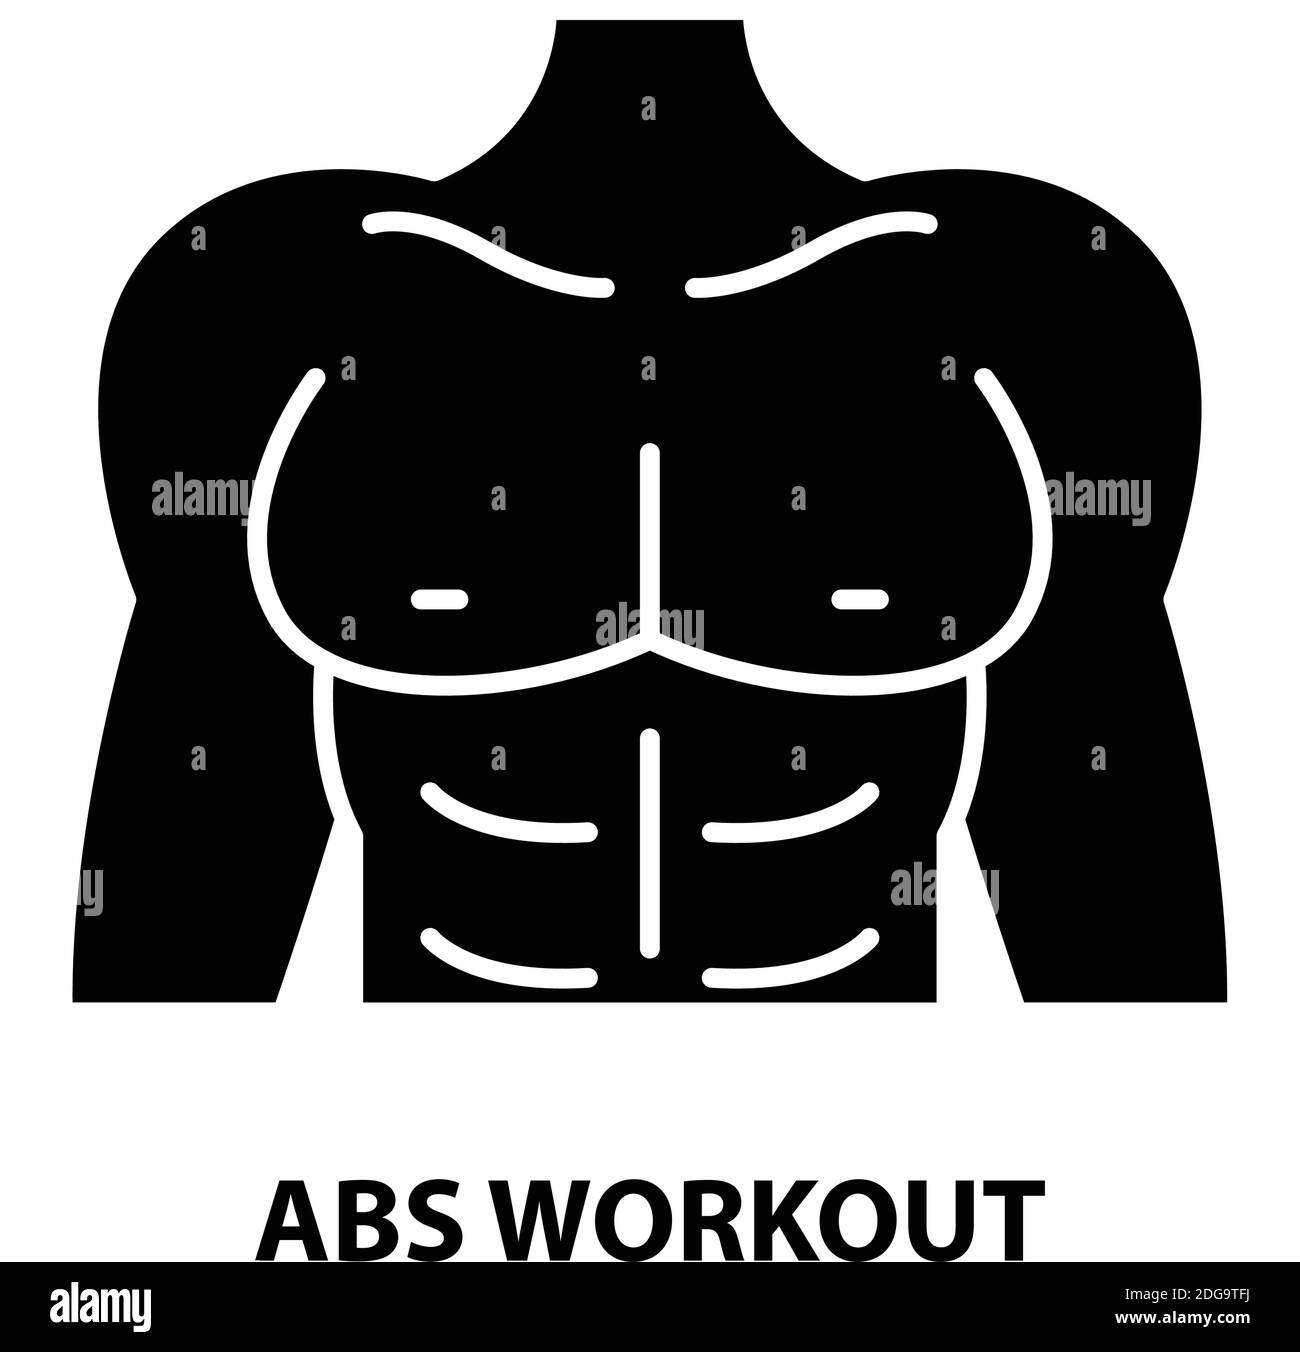 abs workout icon, black vector sign with editable strokes, concept illustration Stock Vector